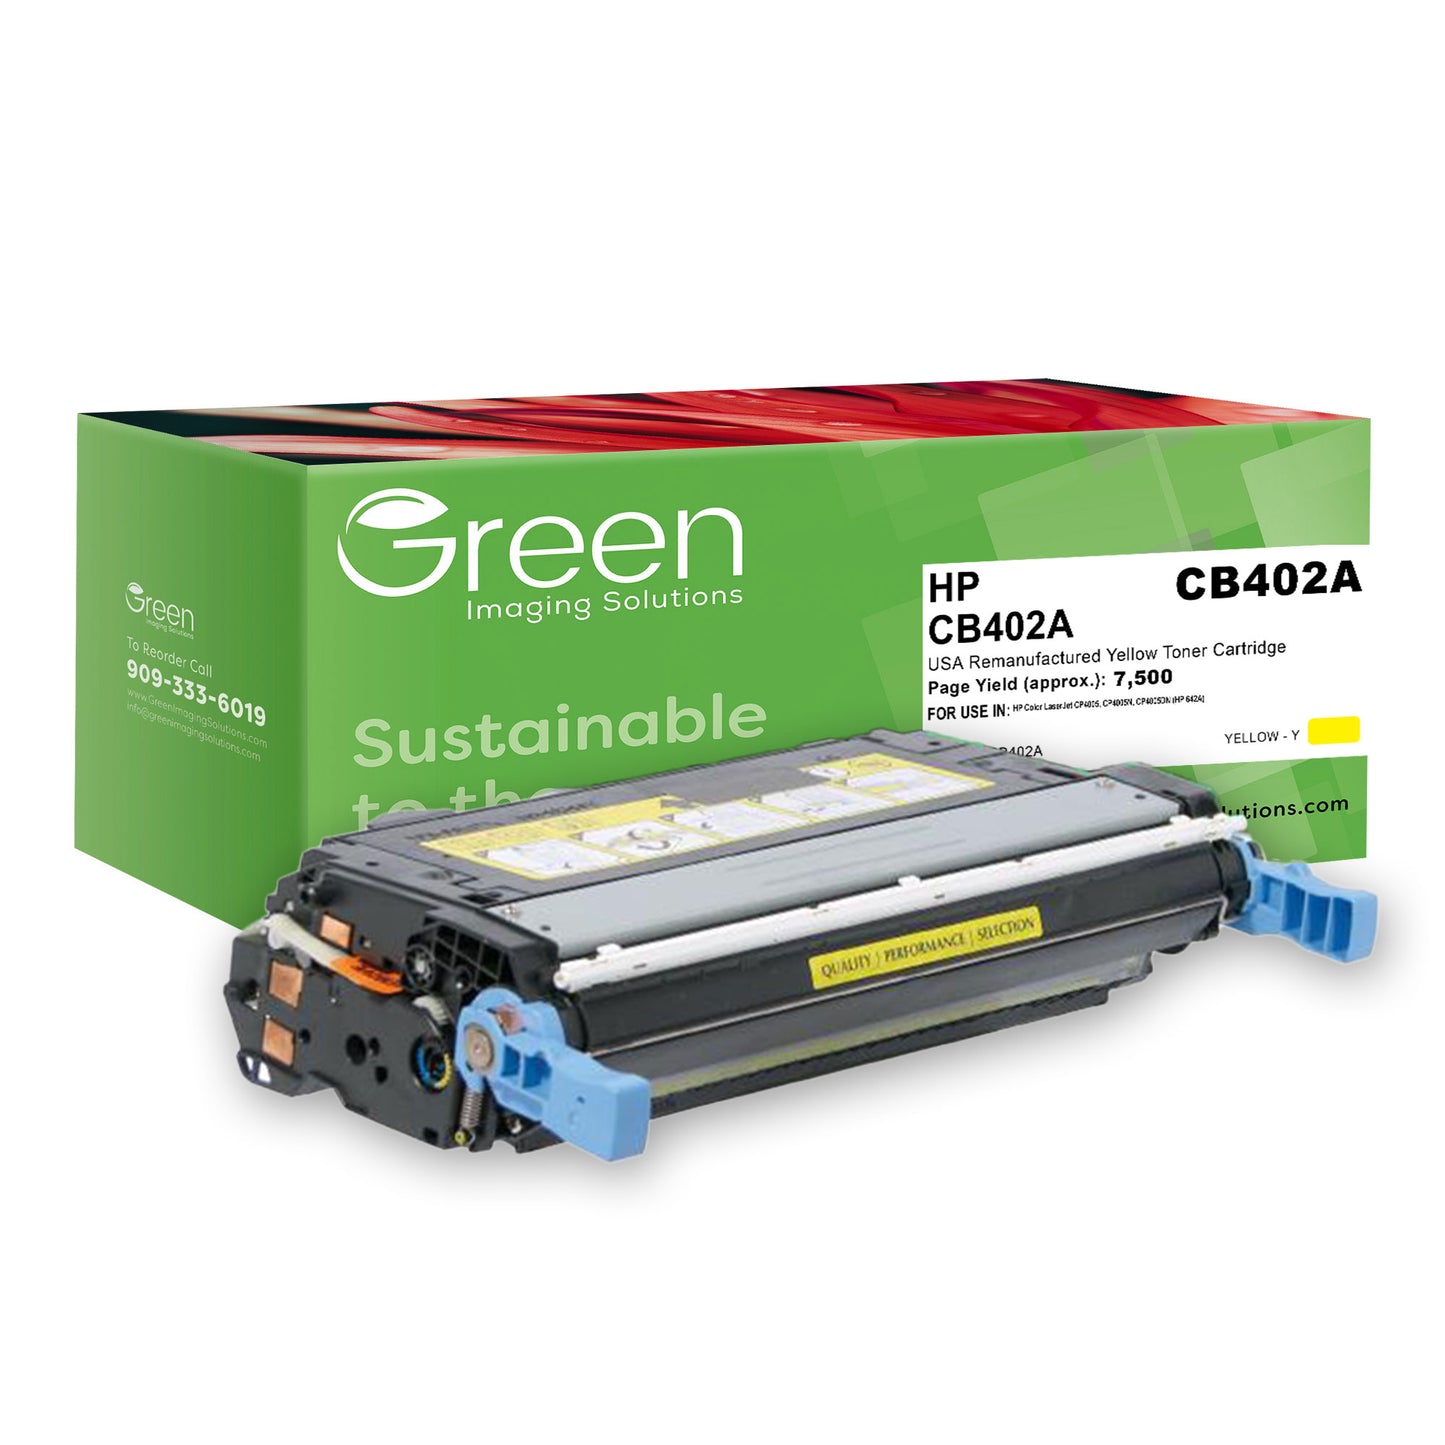 GIS USA Remanufactured Yellow Toner Cartridge for HP CP4005 (HP 642A)